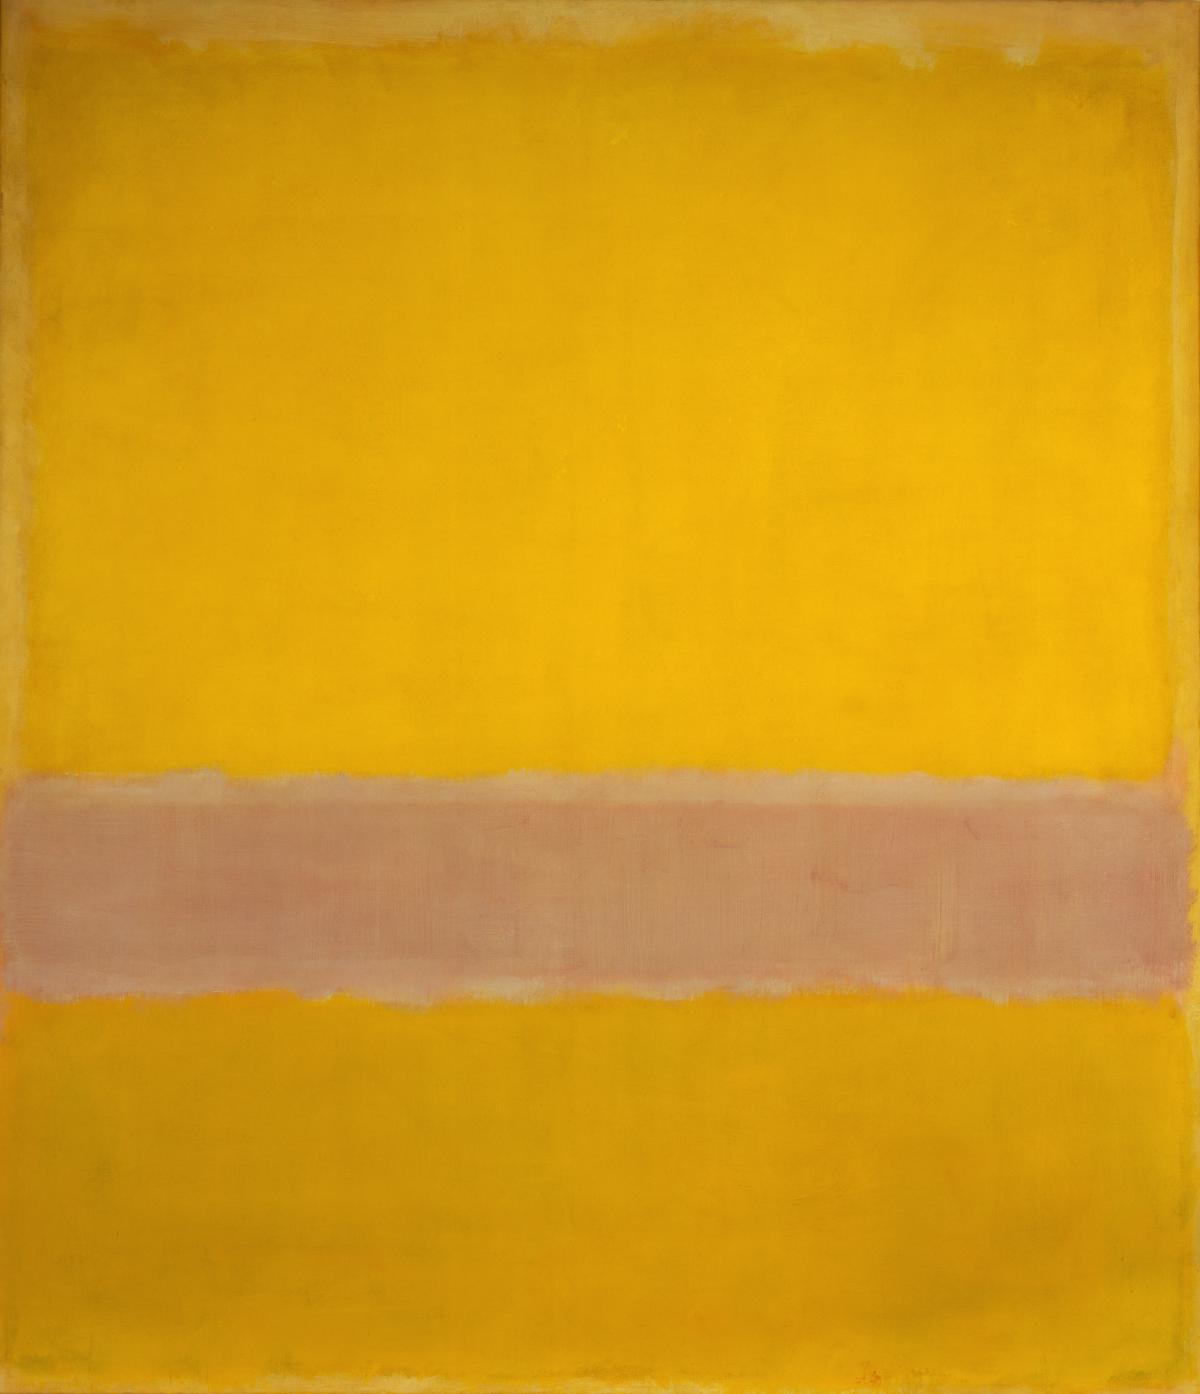 Mark Rothko, Untitled (Yellow, Pink, Yellow on Light Pink), 1955, , Oil on canvas, 79 ¾ x 67 ¾ in., Collection of Kate Rothko Prizel, Copyright © 1998 by Kate Rothko Prizel and Christopher Rothko, Artists Rights Society (ARS), New York